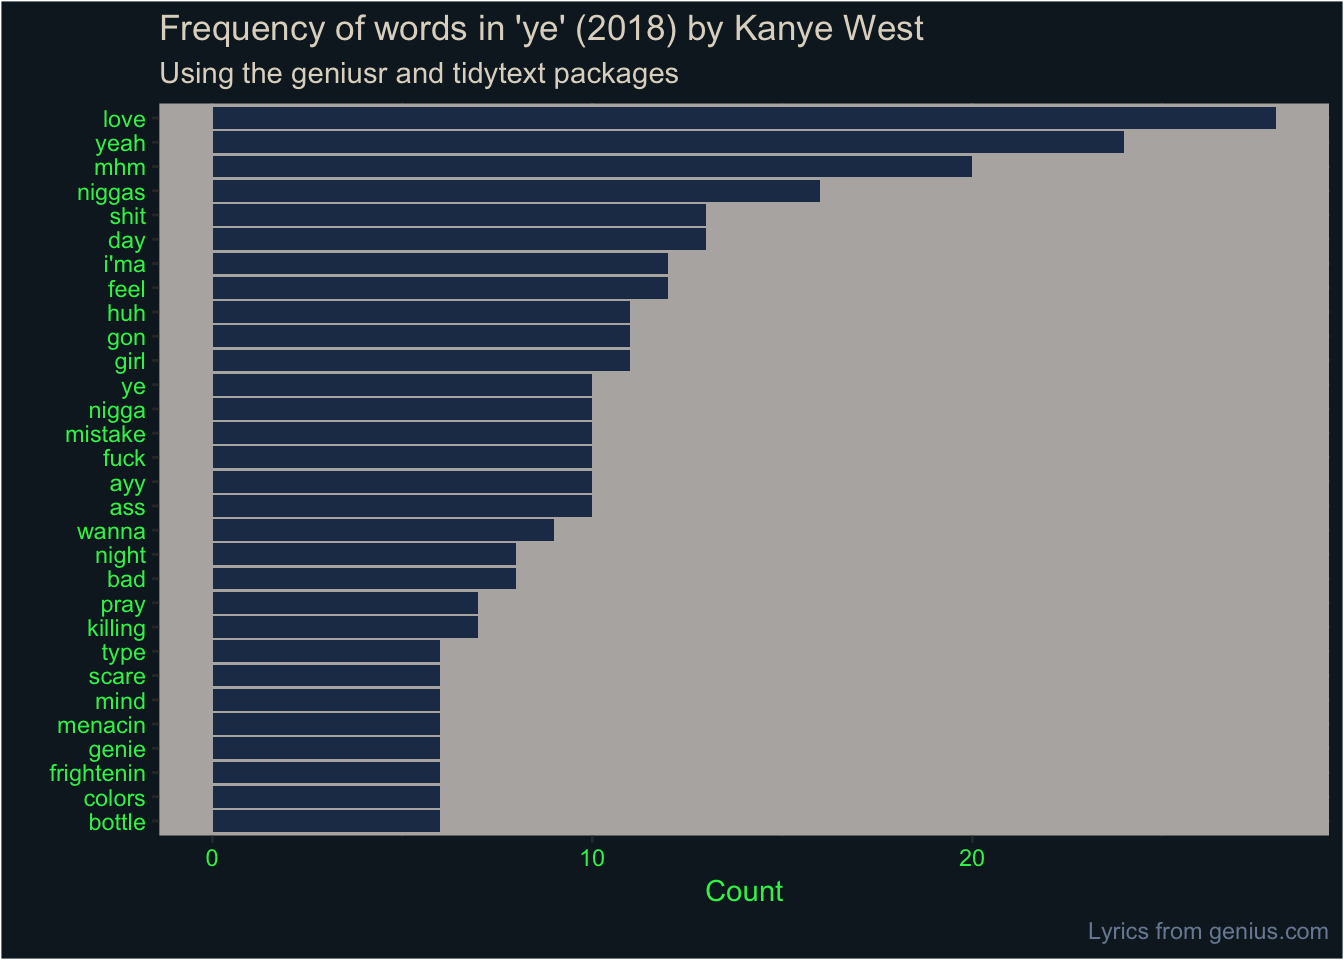 Bar plot of word frequency in Kanye West's 'ye' EP. The most frequent terms are 'love', 'yeah' and 'mhm' with 20 or more appearances.